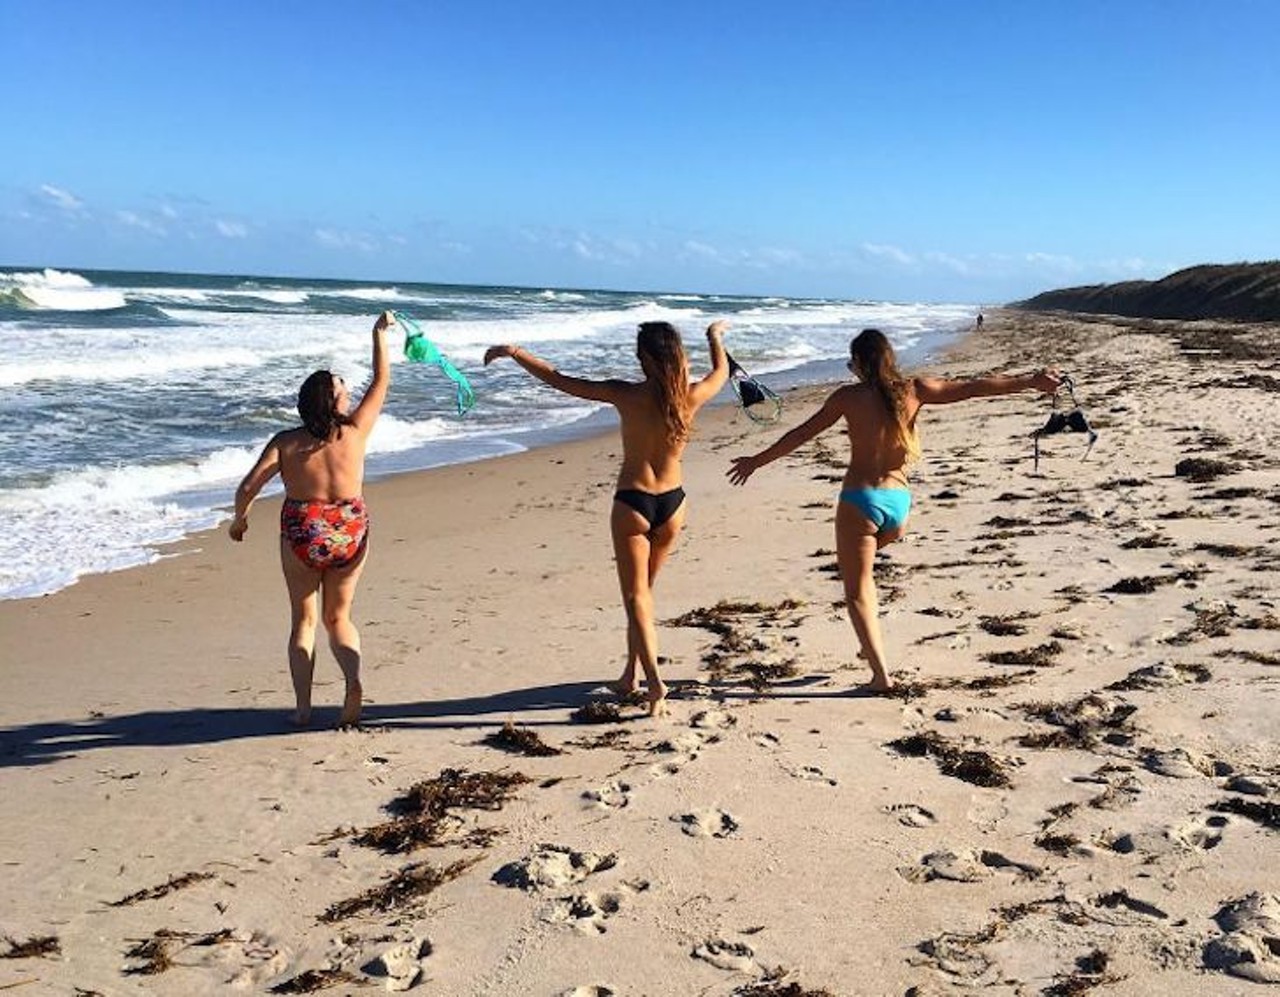 Canaveral National Seashore
1 hour, 10 minutes away
This remote park includes Playalinda Beach, which has a reputation for attracting nude sunbathers. But if you&#146;re not looking to skinny dip during this trip, there are plenty of spots along this stretch of sand where visitors keep their suits on. 
Photo via shannonwaynee/Instagram